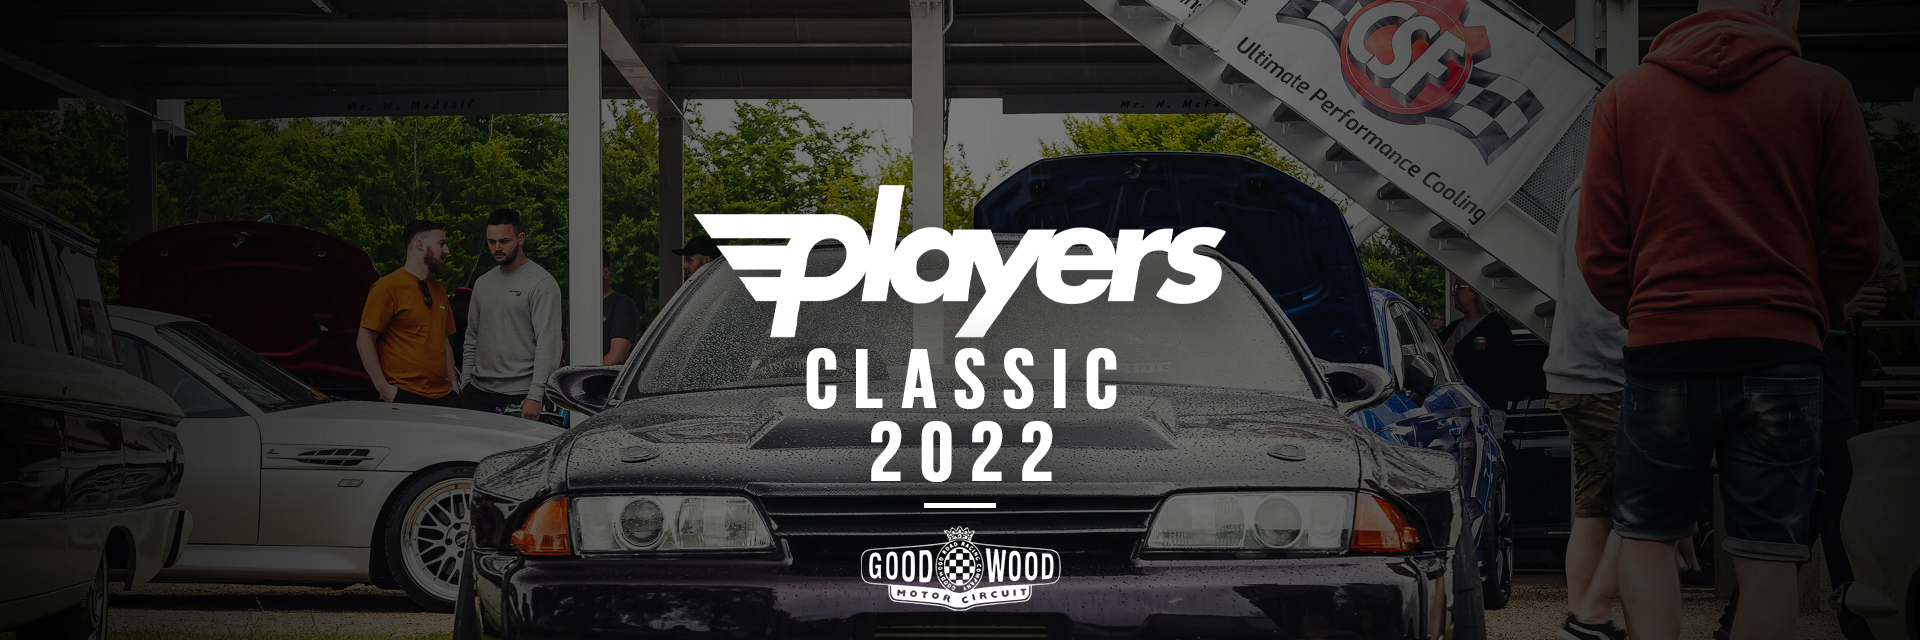 Players Classic 2022 at Goodwood Motor Circuit with CSF Blog Header